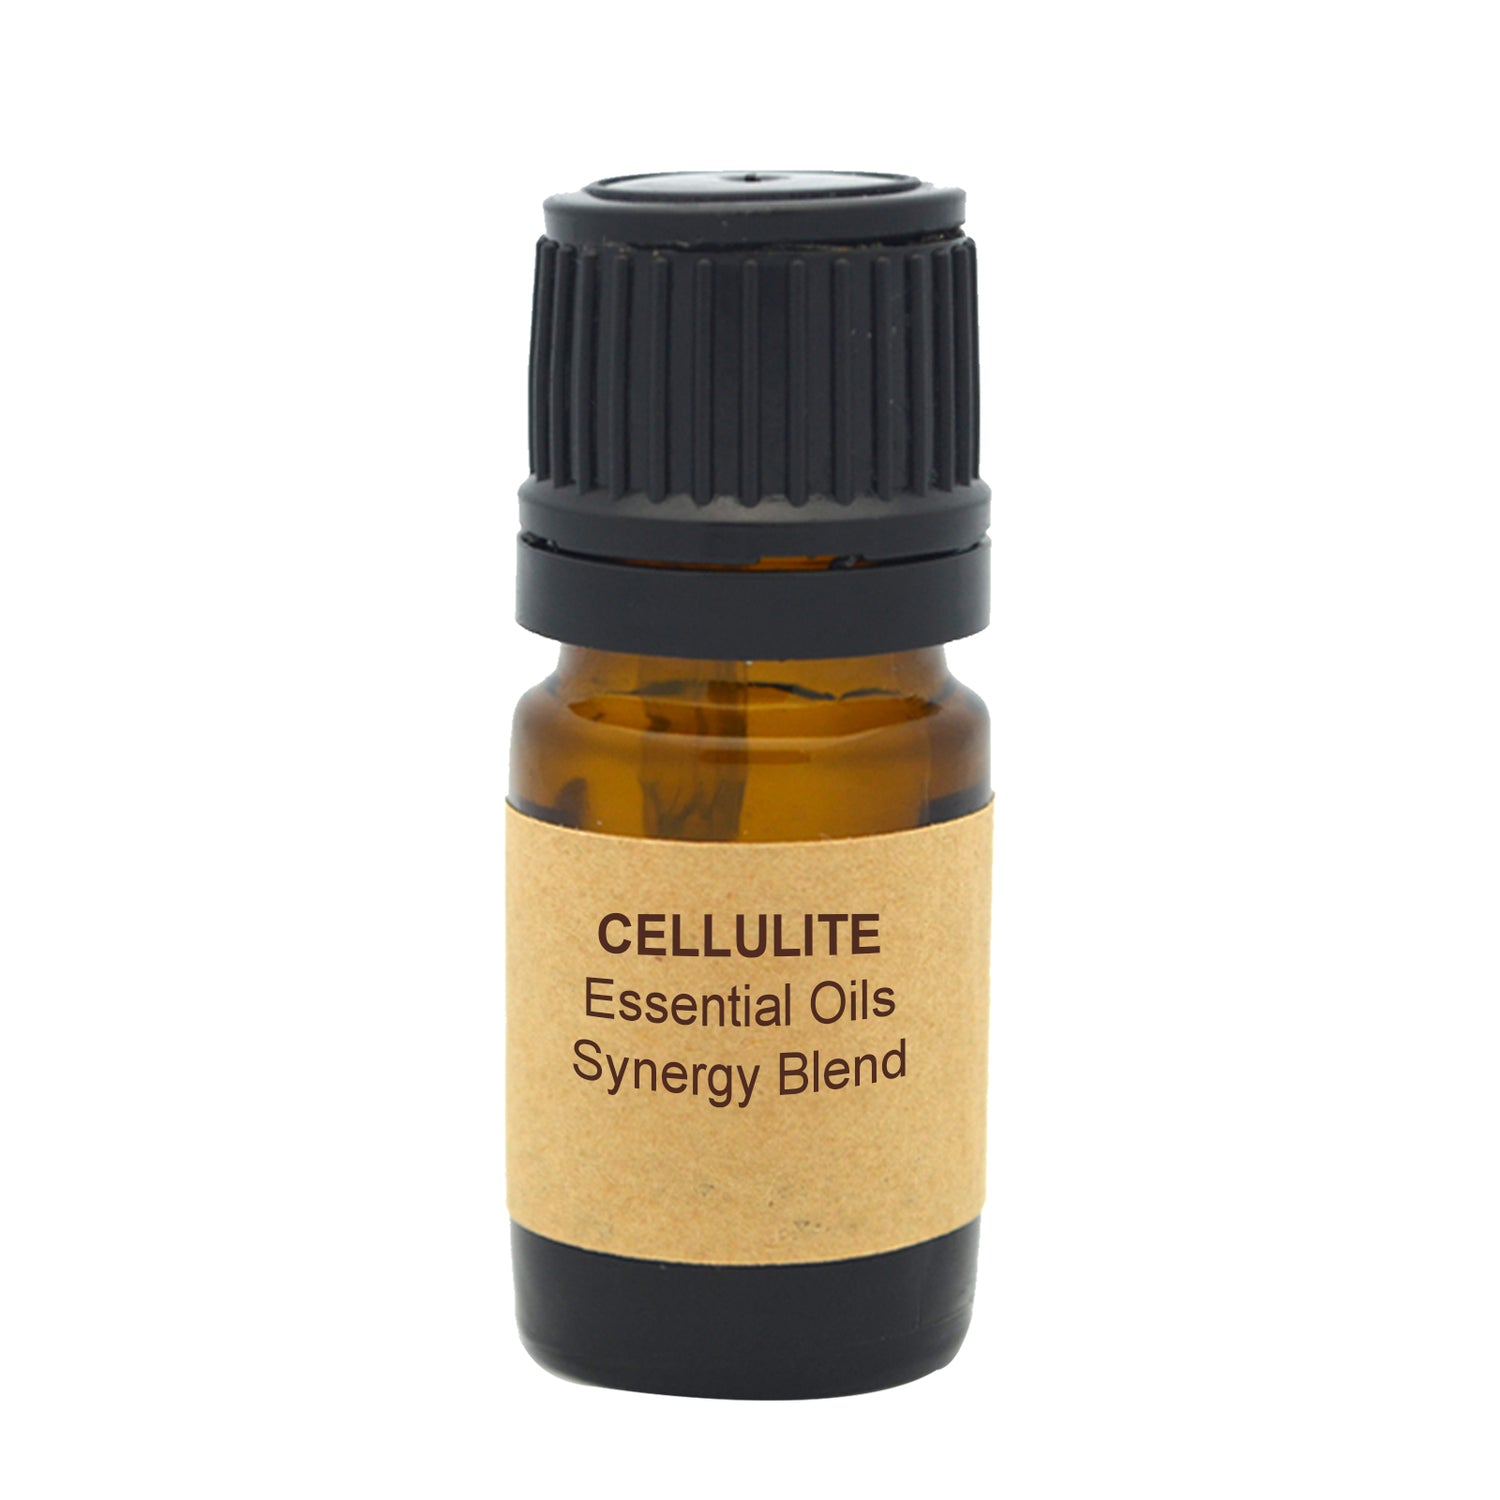 Cellulite Essential Oils Synergy Blend.